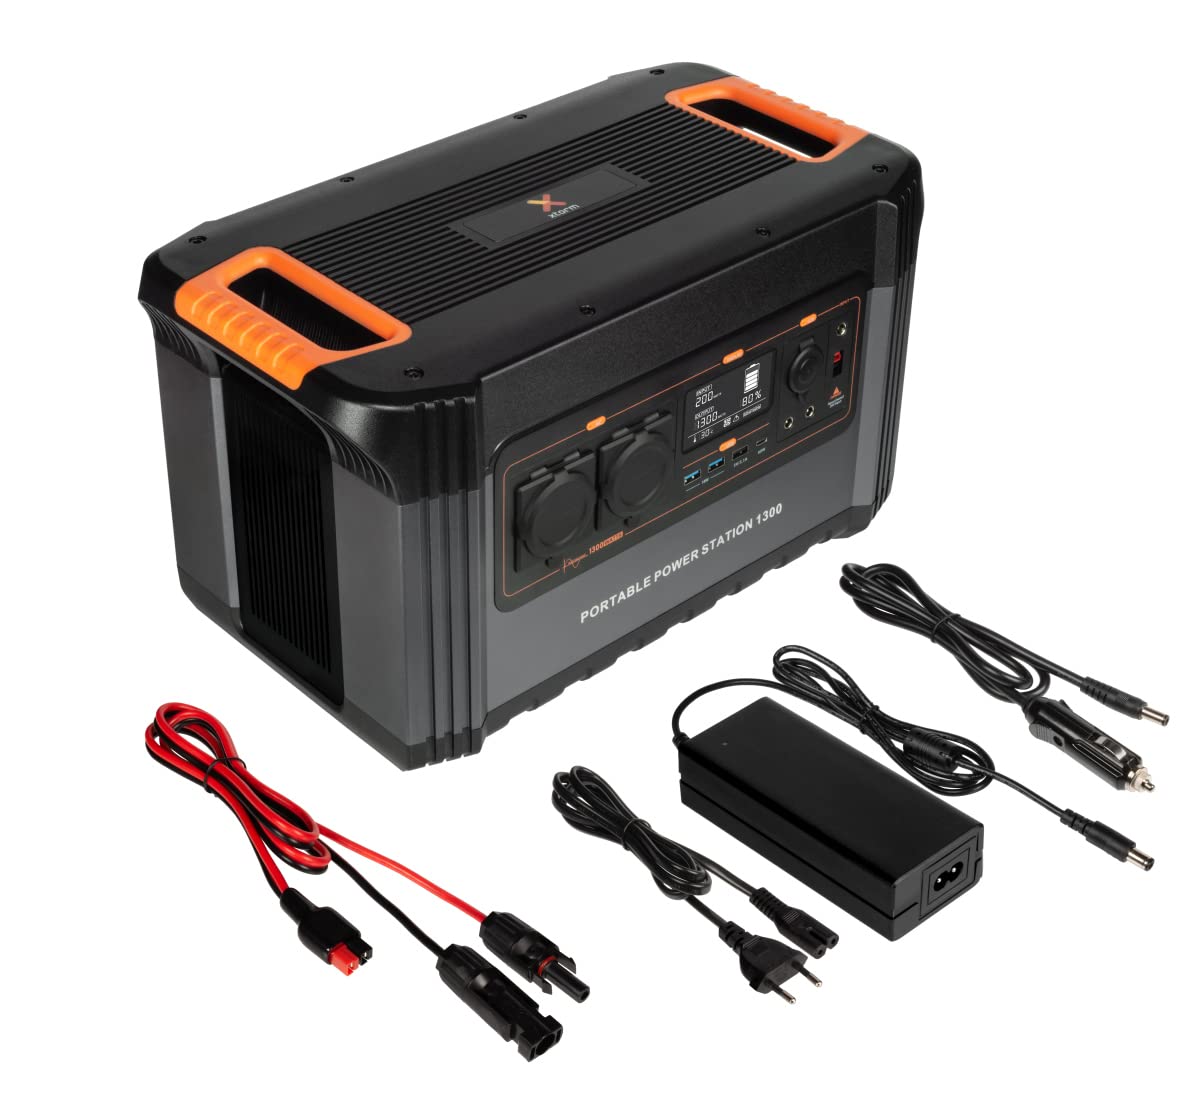 XTORM PORTABLE POWER STATION